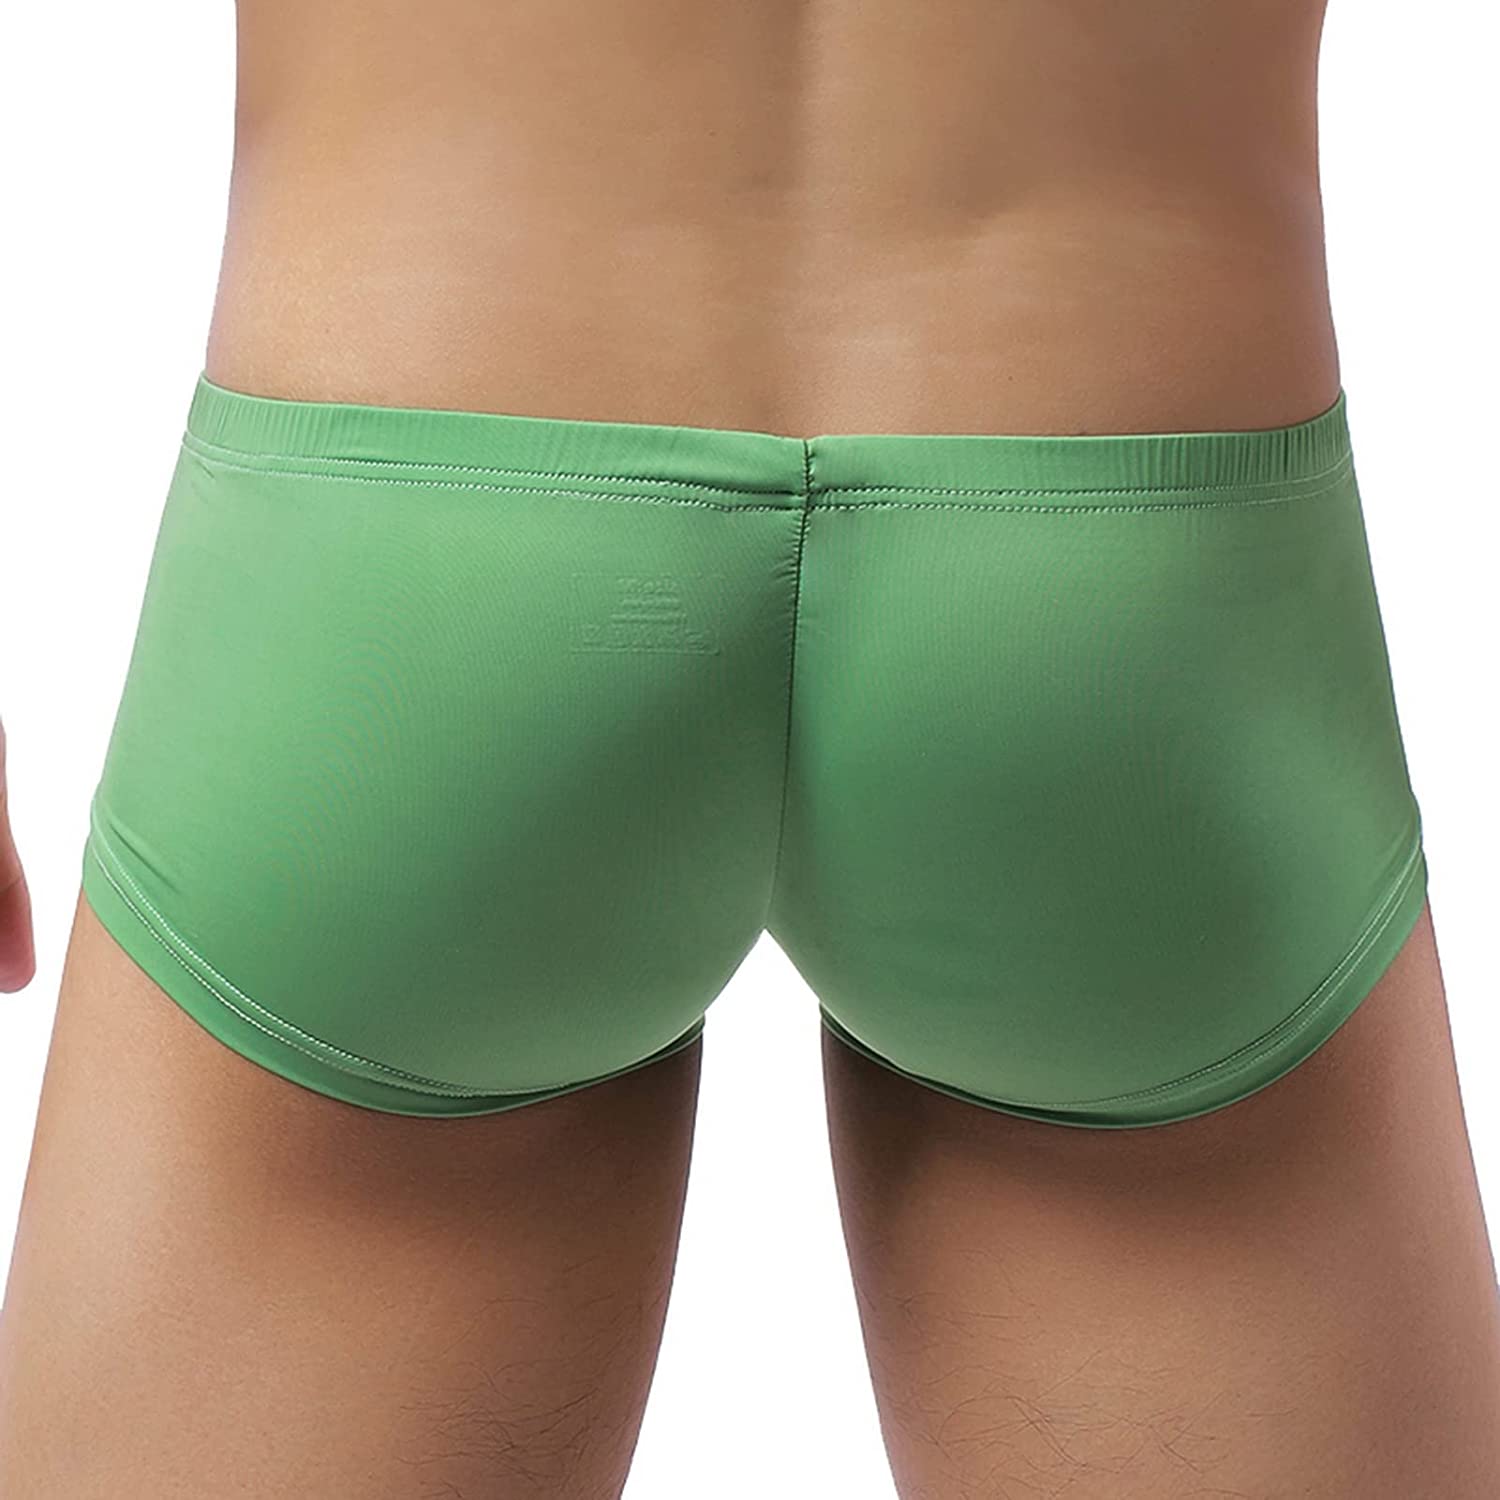  SAVOVUX Vasectomy Underwear, with 2 Cold Ice Packs